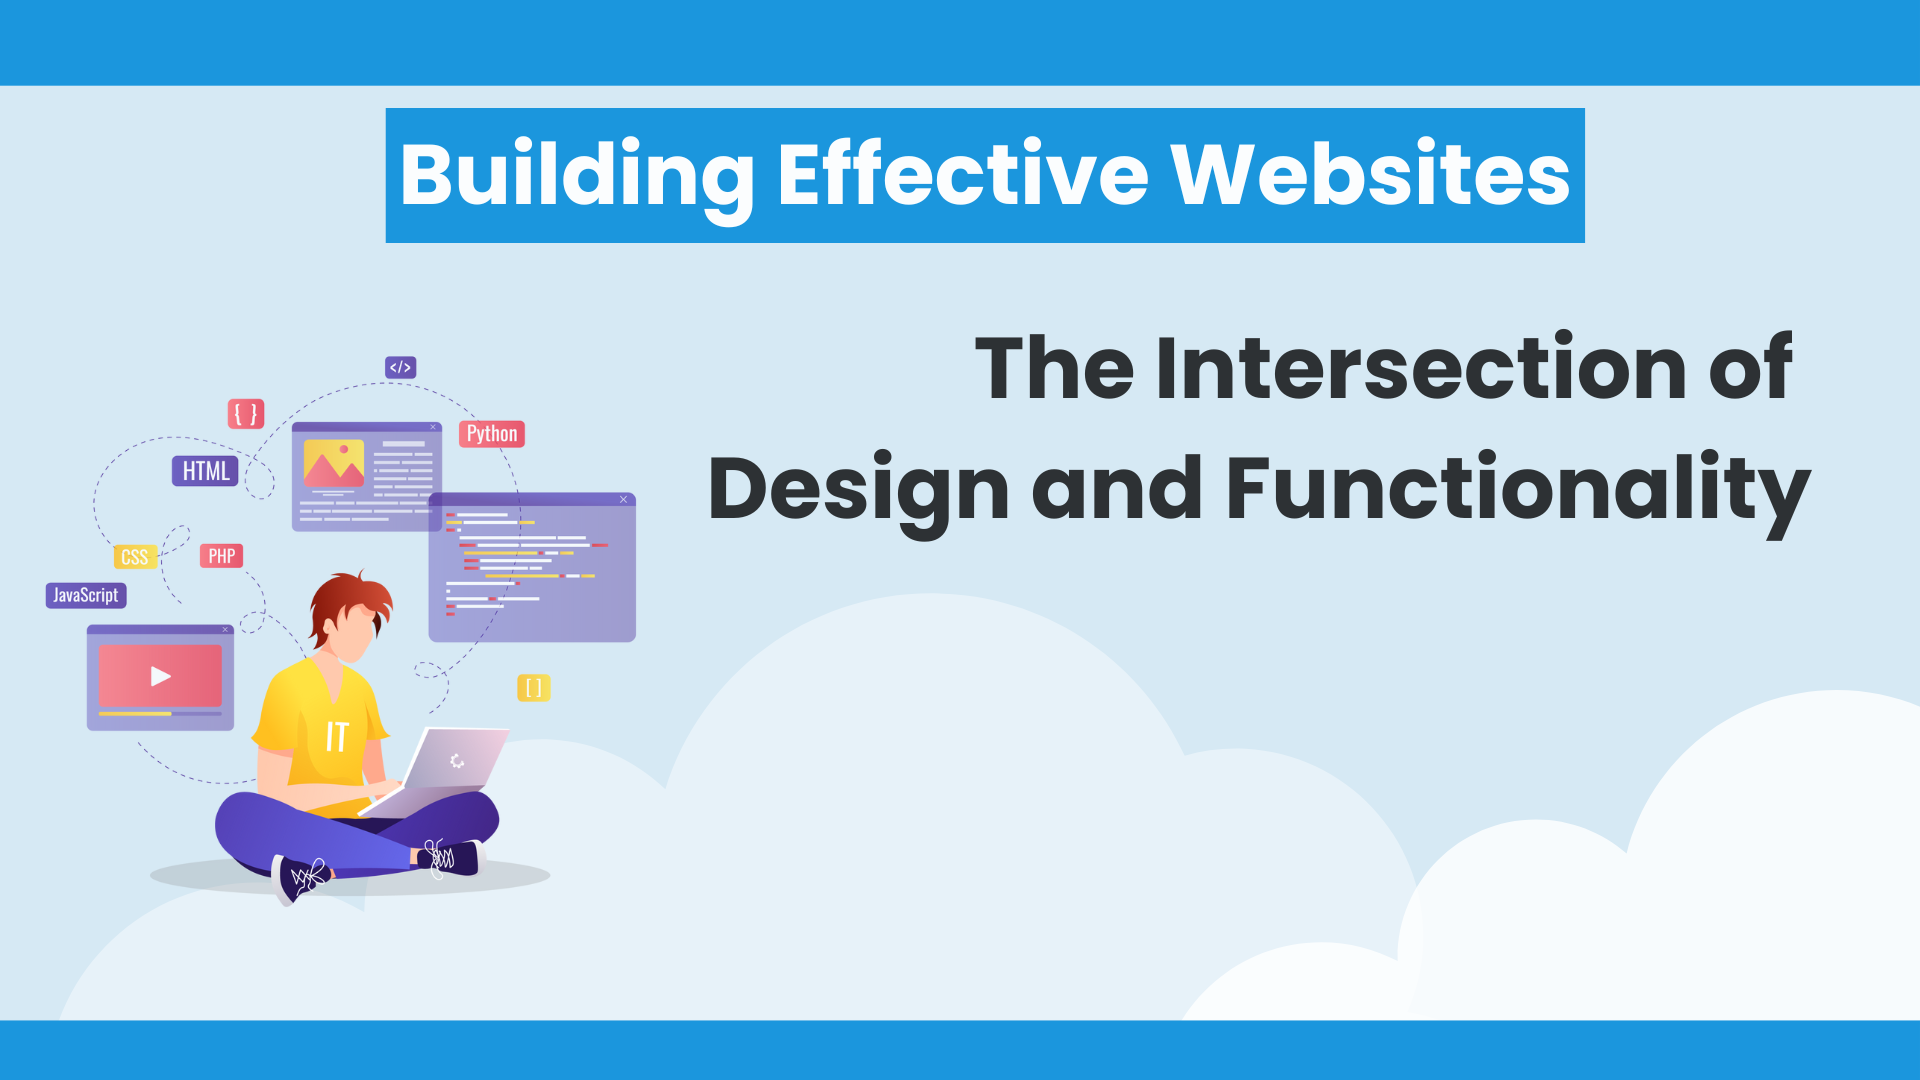 Building Effective Websites: The Intersection of Design and Functionality